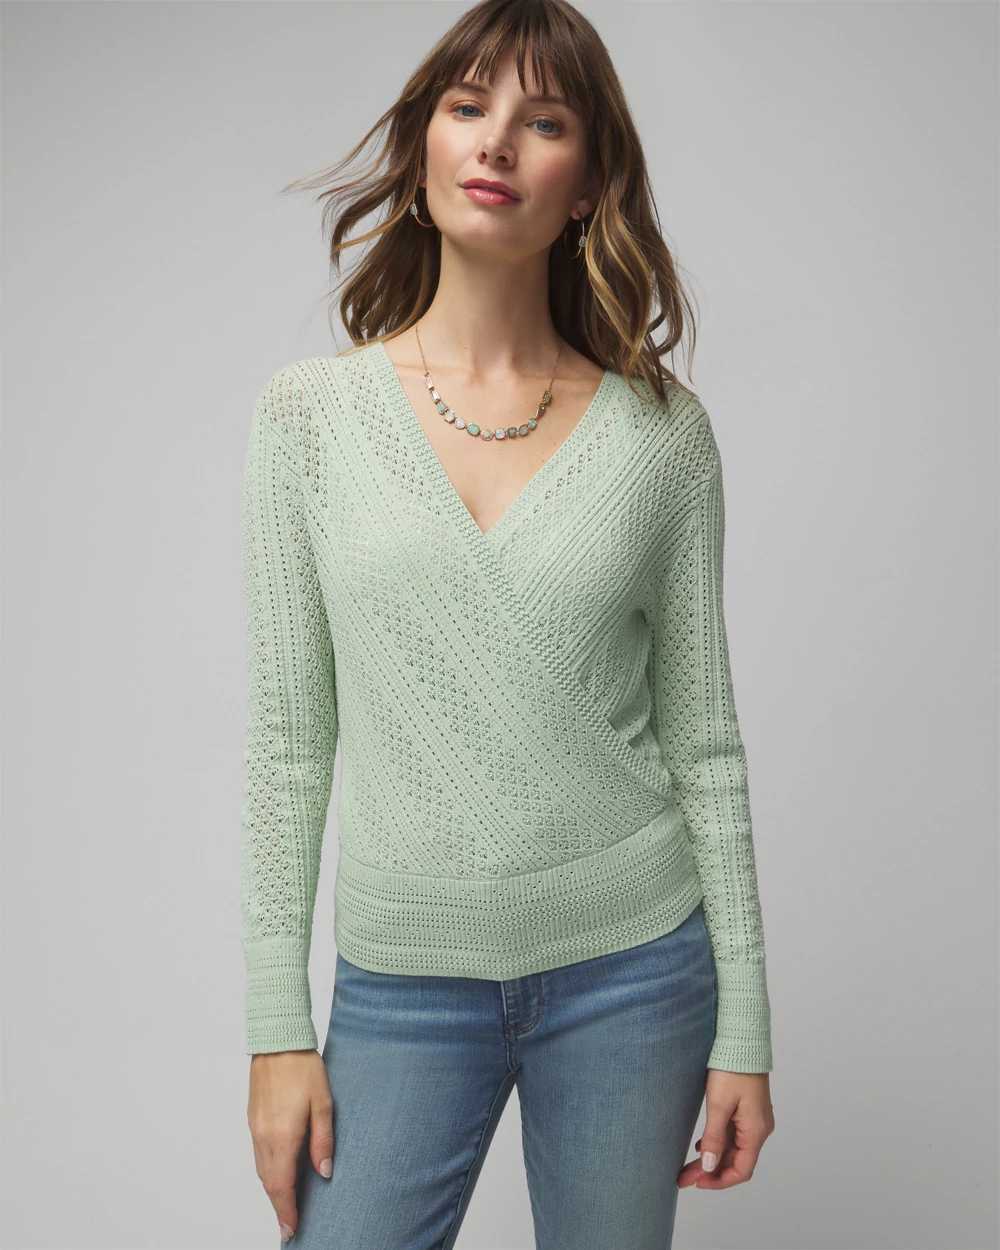 Long Sleeve Stitchy Surplice Pullover Sweater